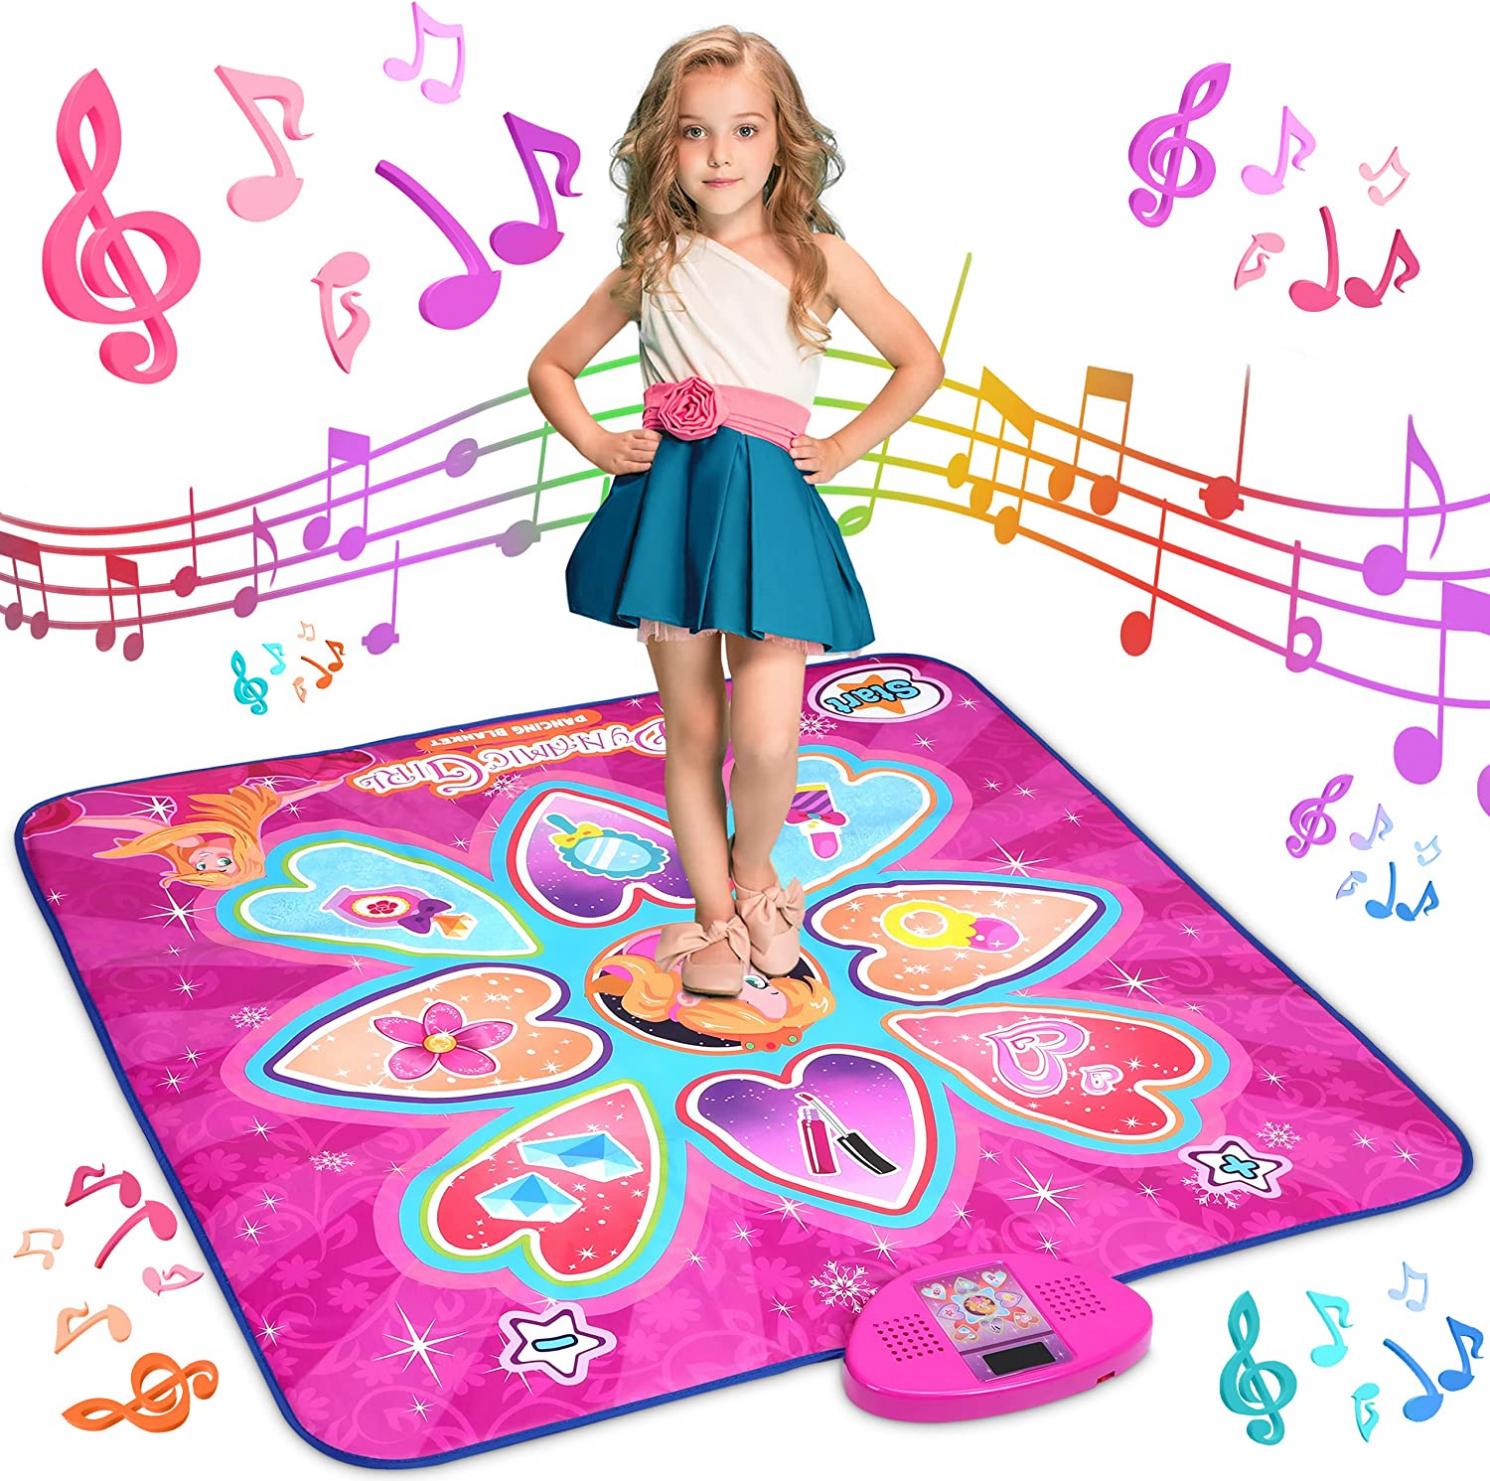 BUAIAHUG Upgraded Dance Mat for Kids - Christmas Birthday Gifts Toys for 3 4 5 6 7 8 9 Year Old Girls - 7 Game Modes, 10 Challenge Levels, 10 Built-in Music and LED Lights